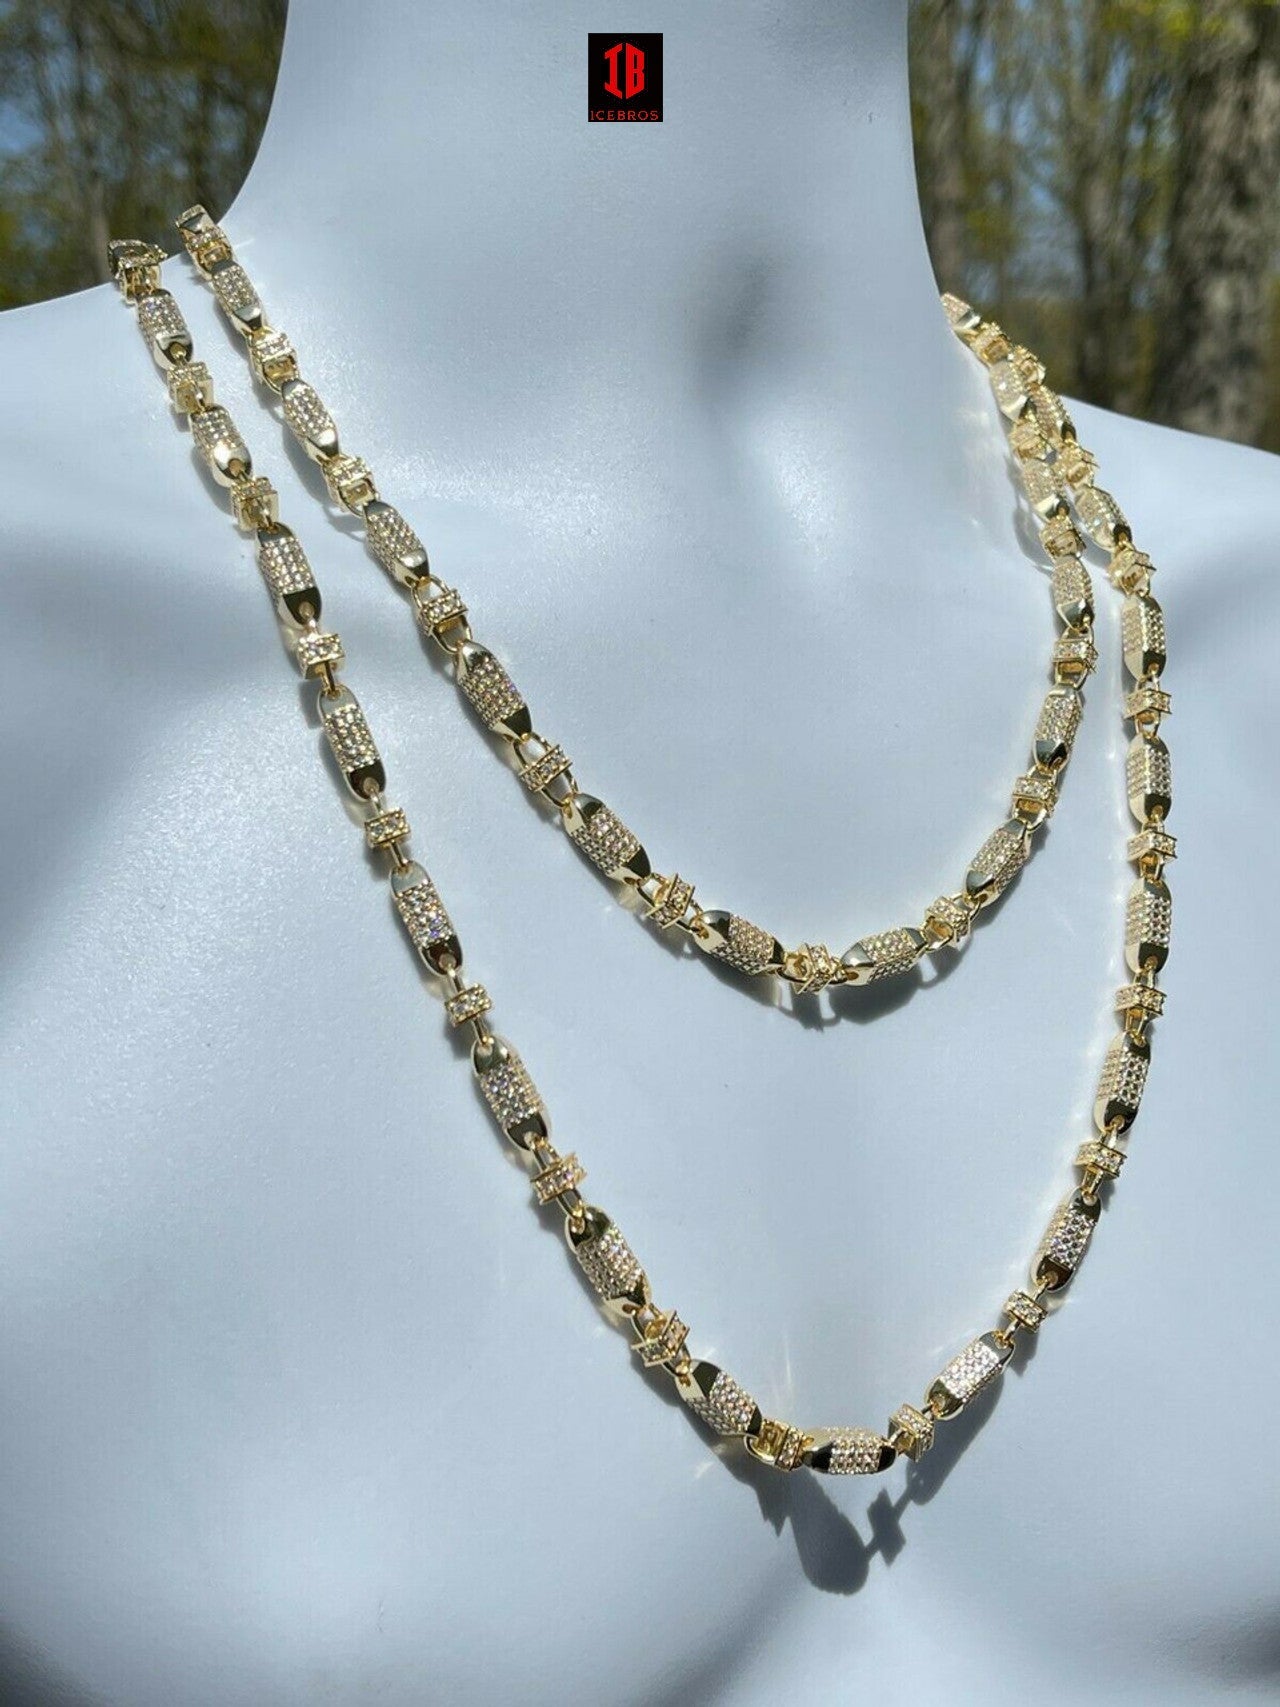 Men Bullet Chain 14k Gold Over Real 925 Silver Iced Flooded Out Hip Hop Necklace (YELLOW GOLD)